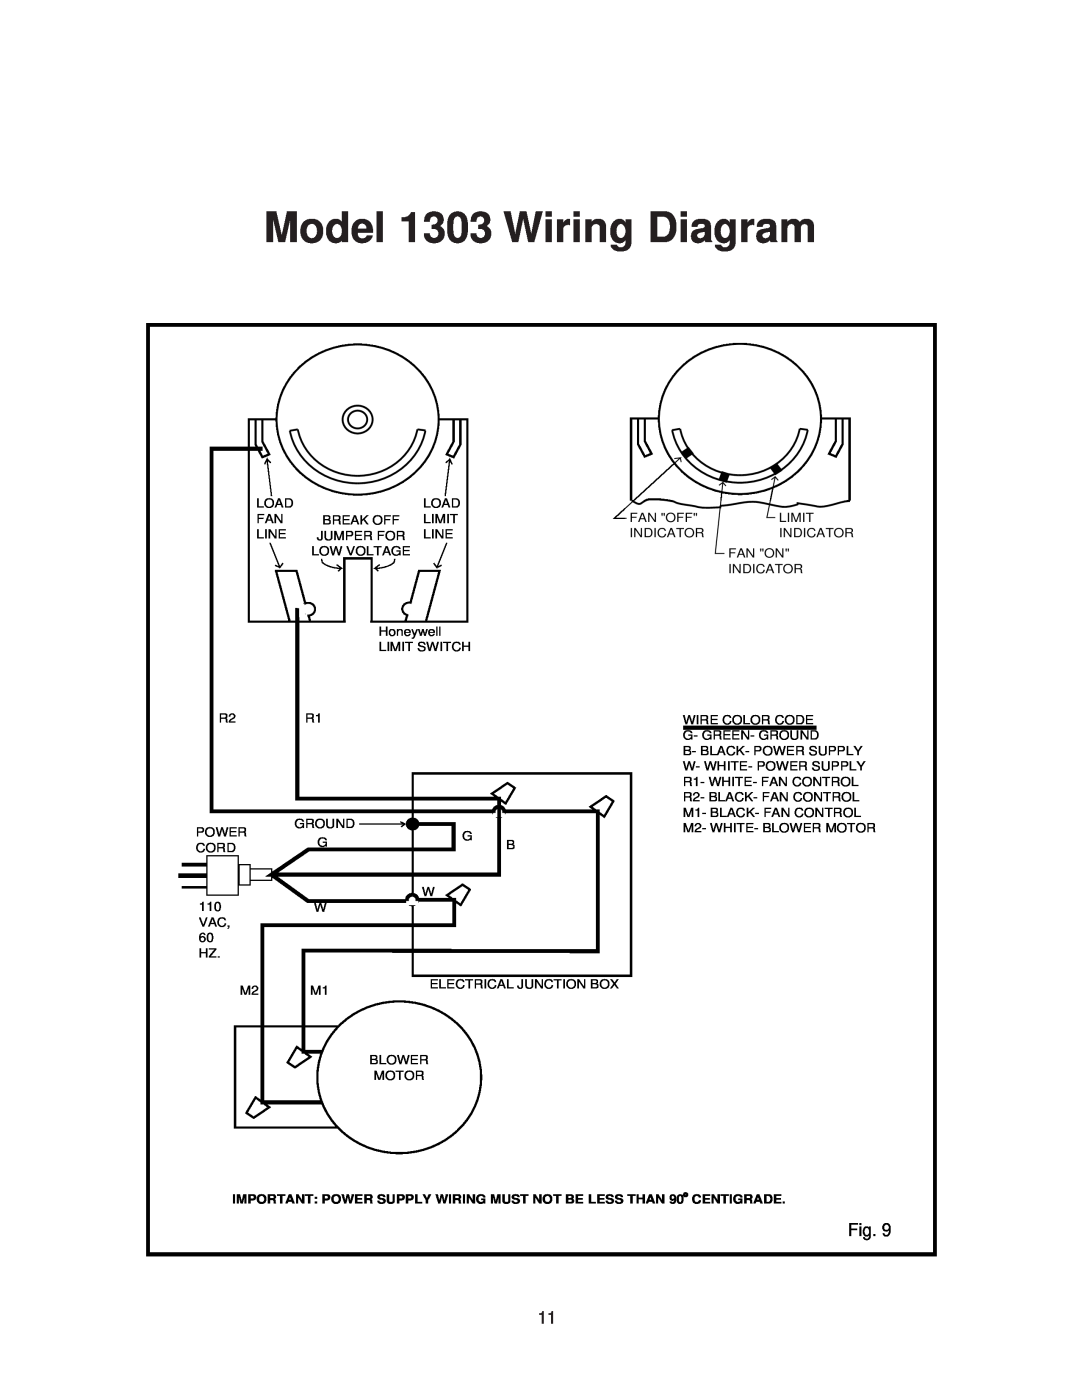 United States Stove AIR warranty Model 1303 Wiring Diagram 